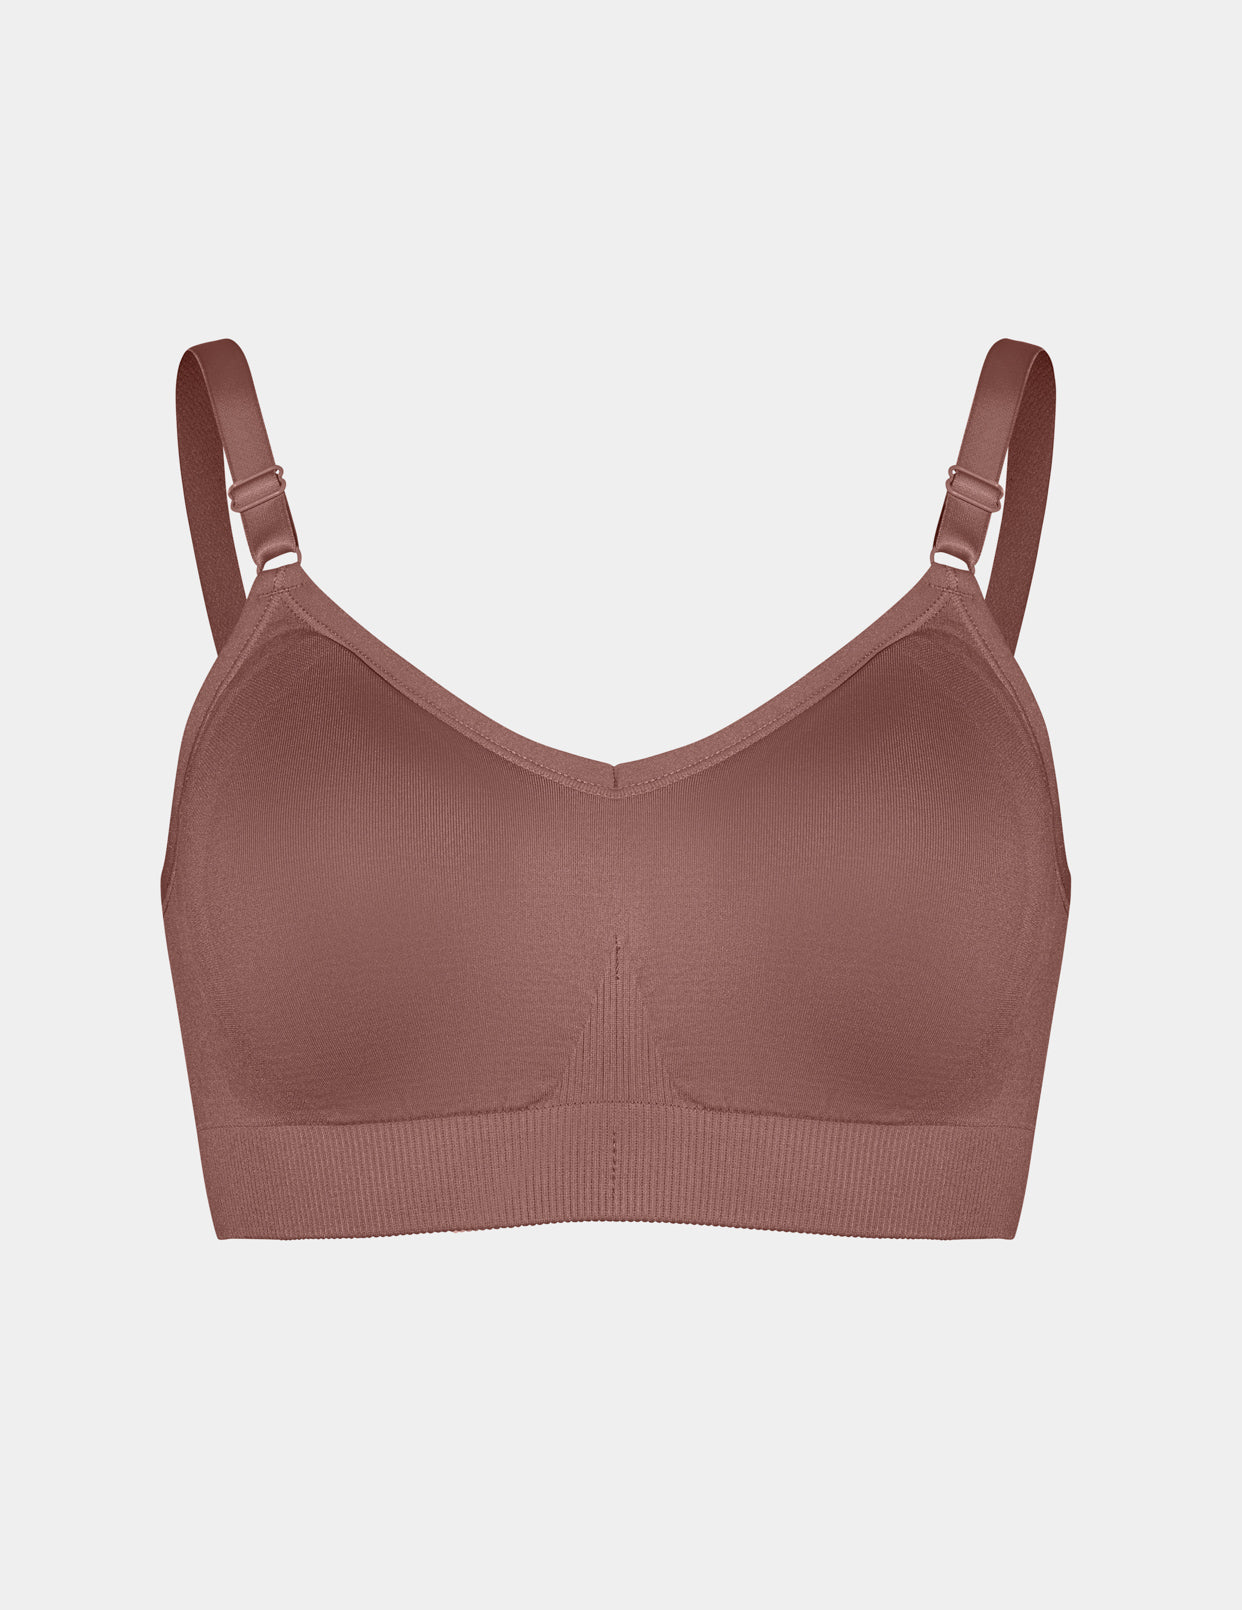 Up To 12% Off on RBX Women's Seamless Sports Bra